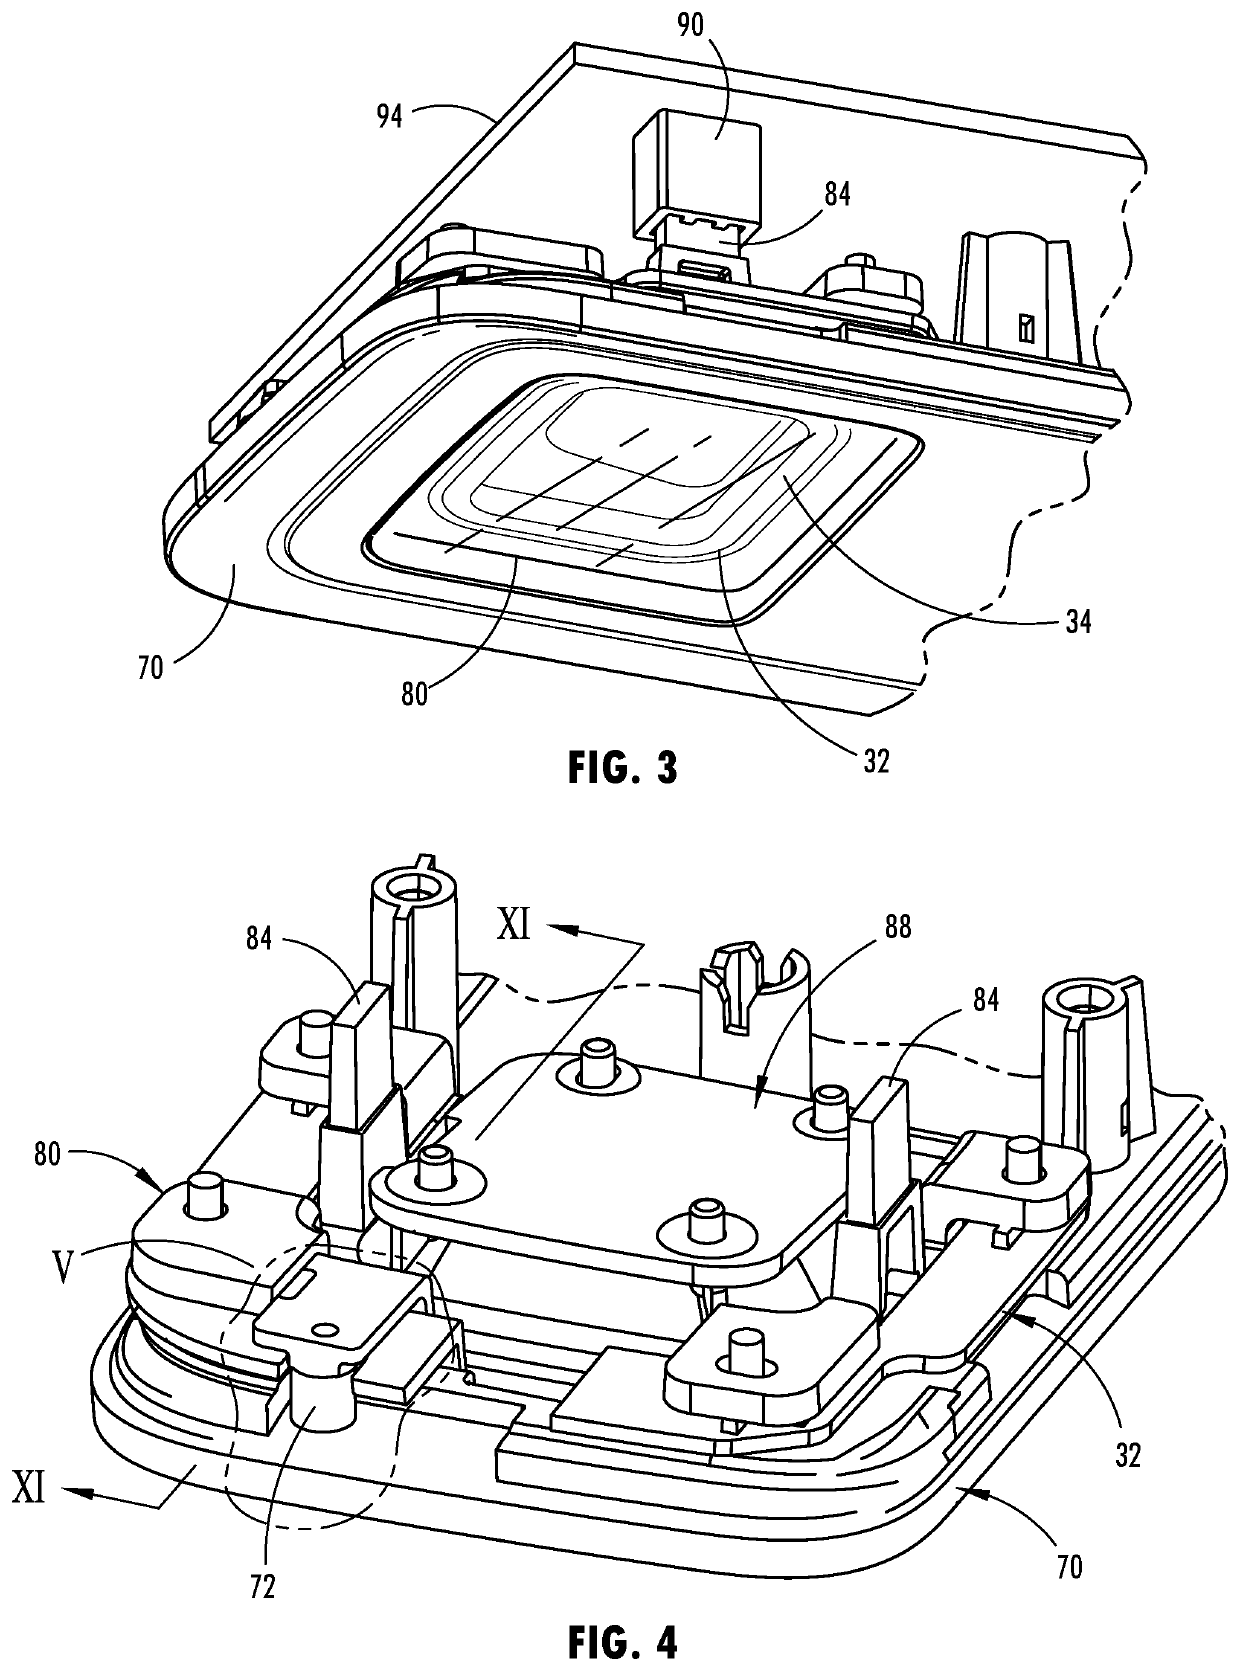 Vehicle trim assembly having sensor and grounded trim component